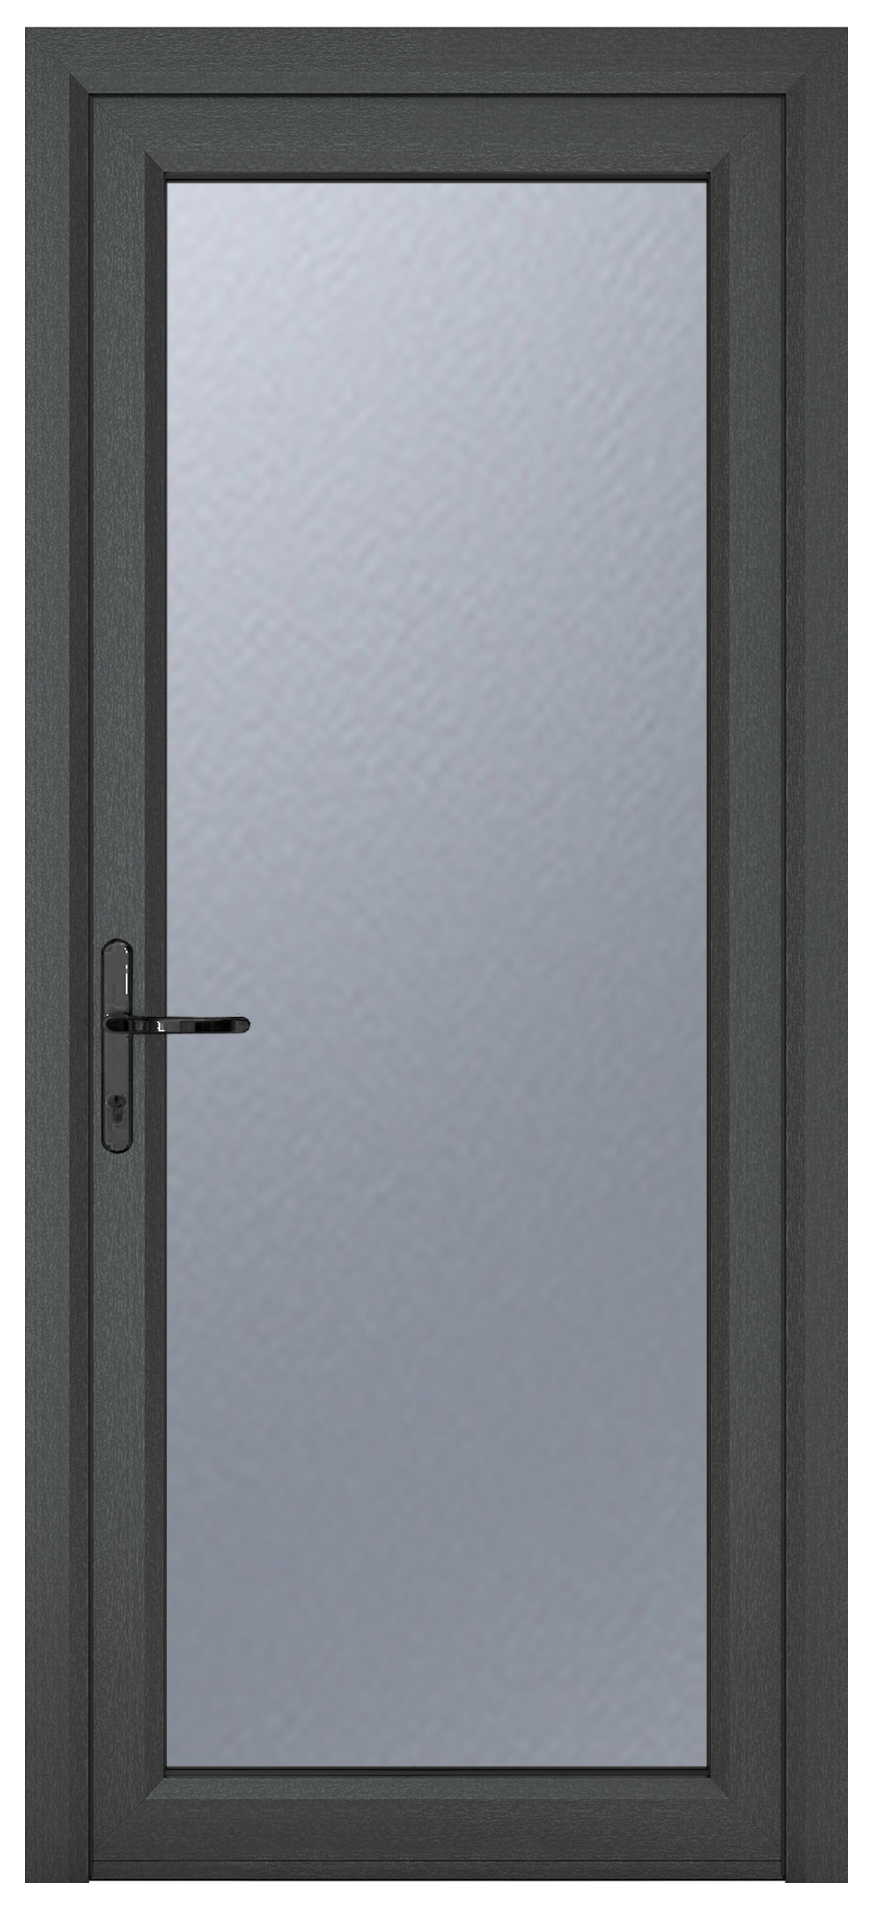 Crystal uPVC Grey Right Hand Inwards Obscure Double Glazed Full Glass Single Door - 2090mm